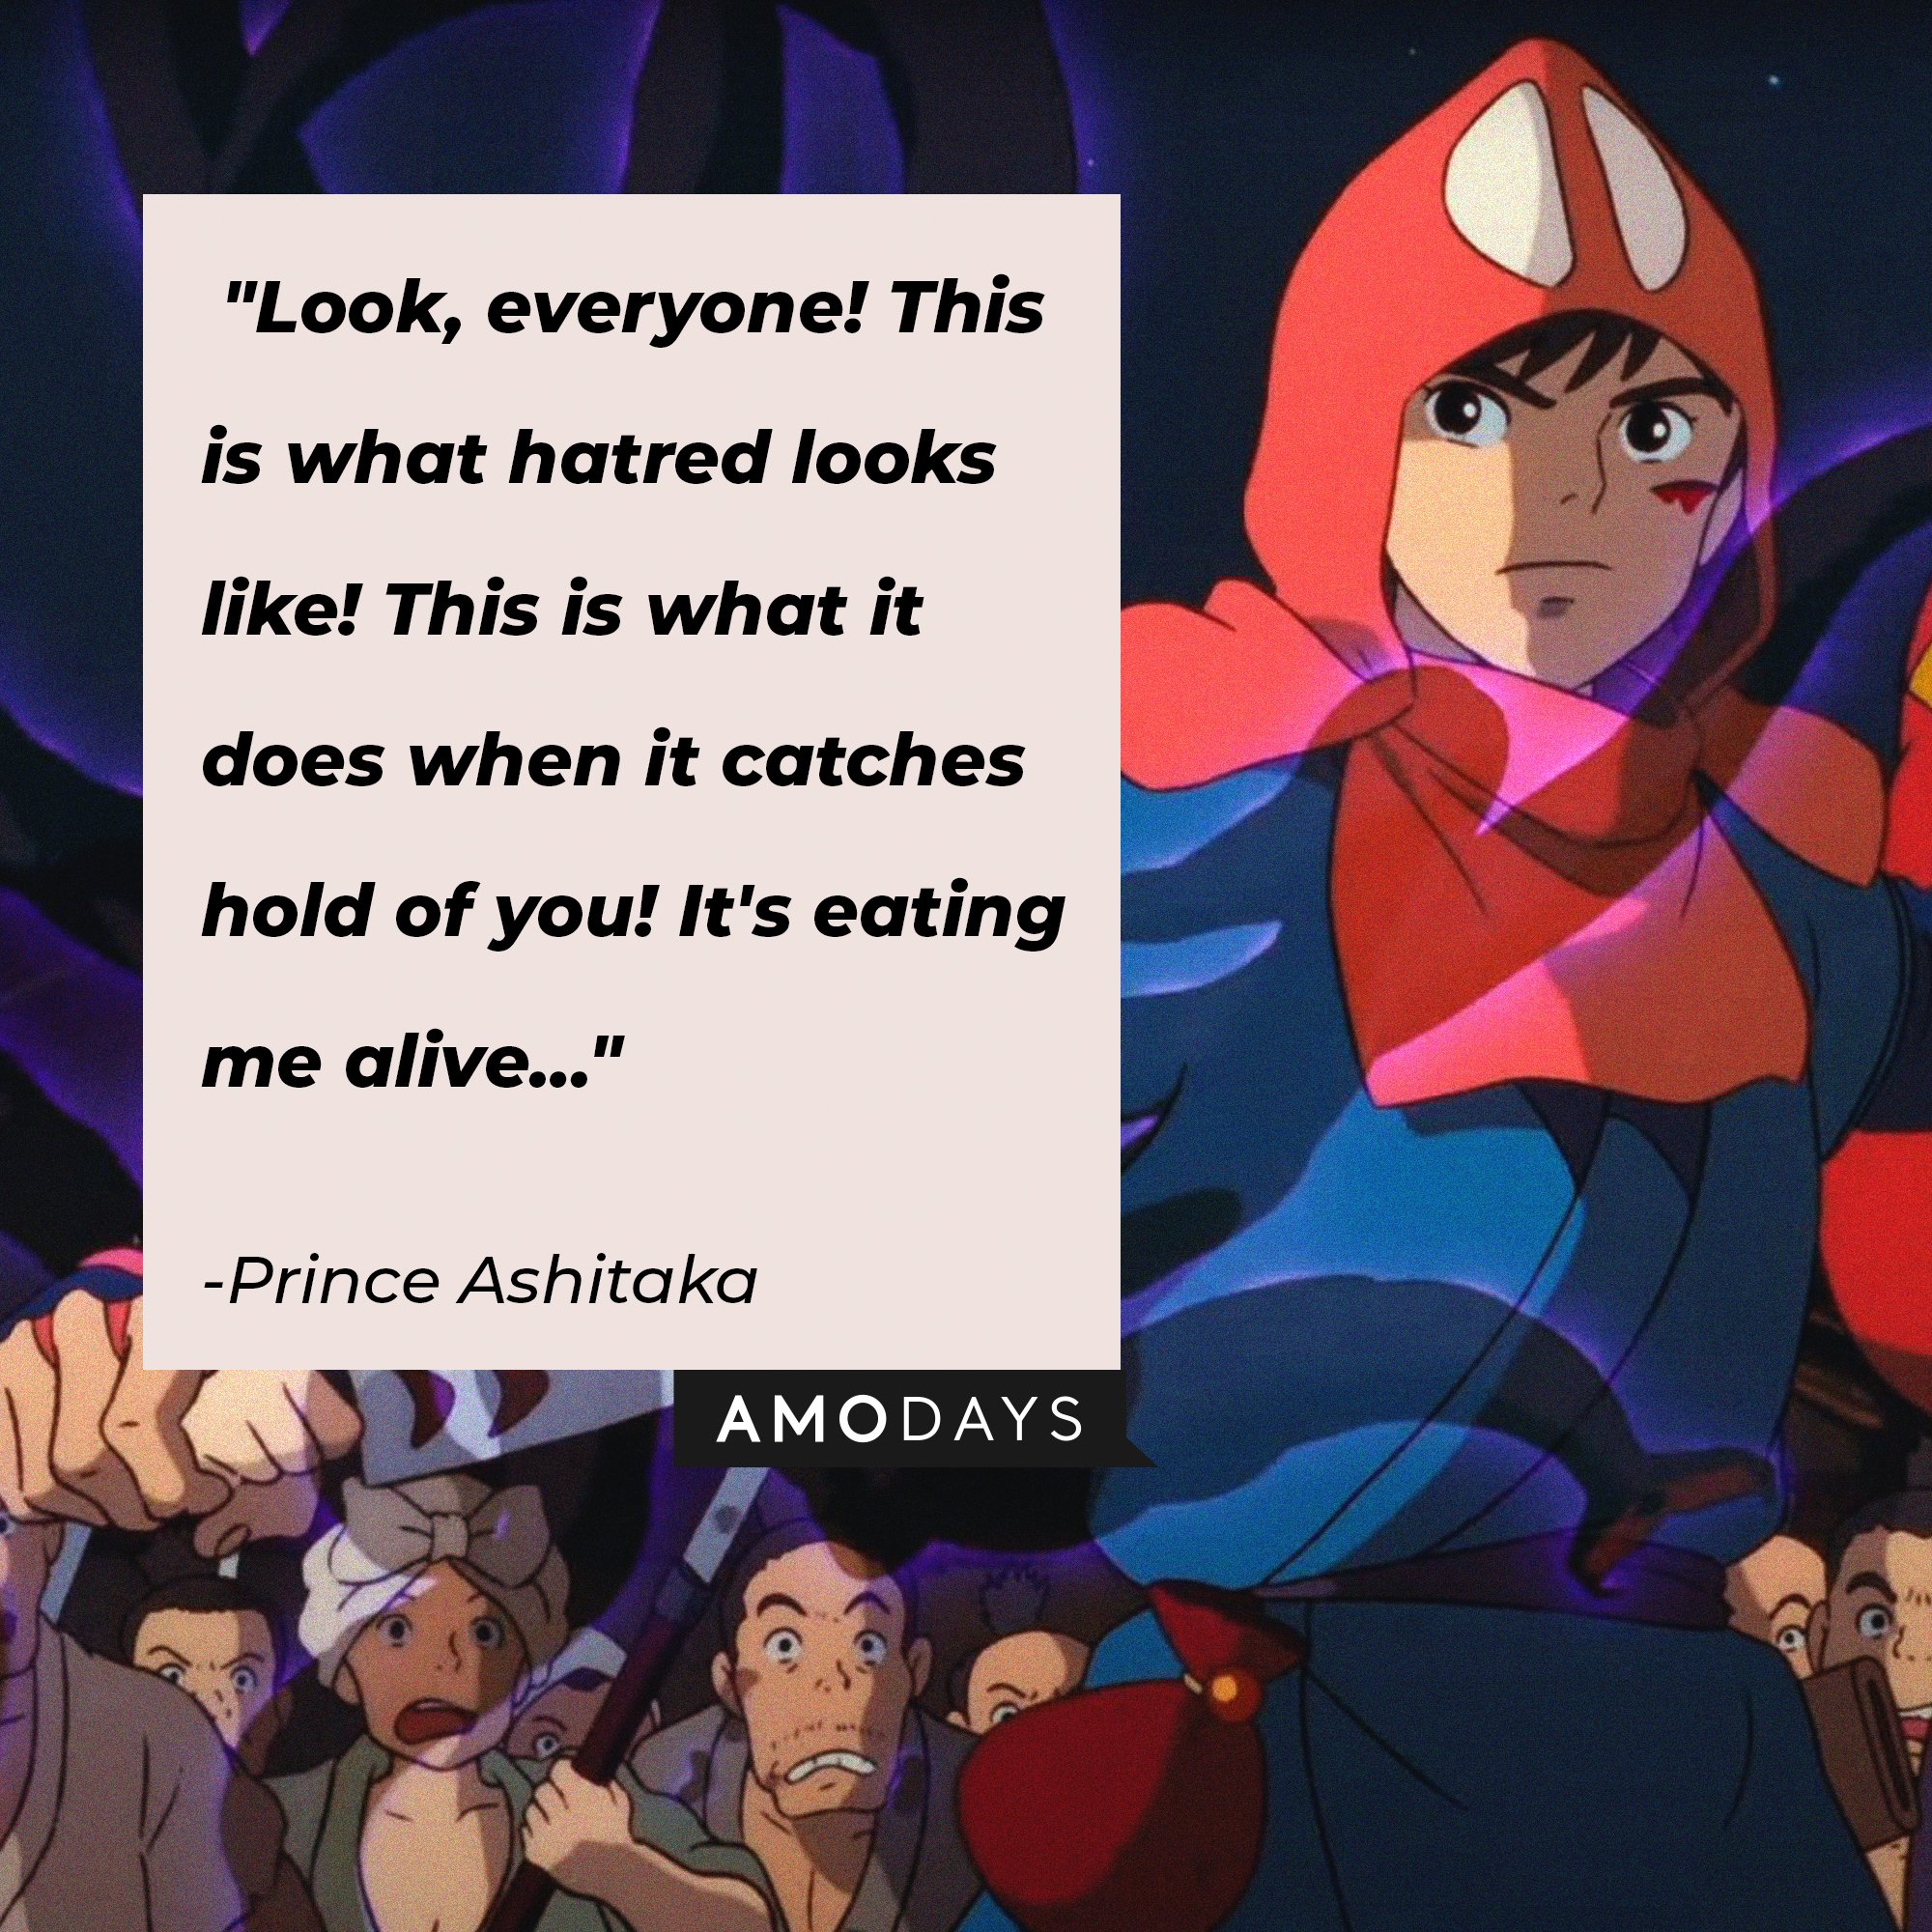   Prince Ashitaka’s quote: "Look, everyone! This is what hatred looks like! This is what it does when it catches hold of you! It's eating me alive…" | Image: AmoDays